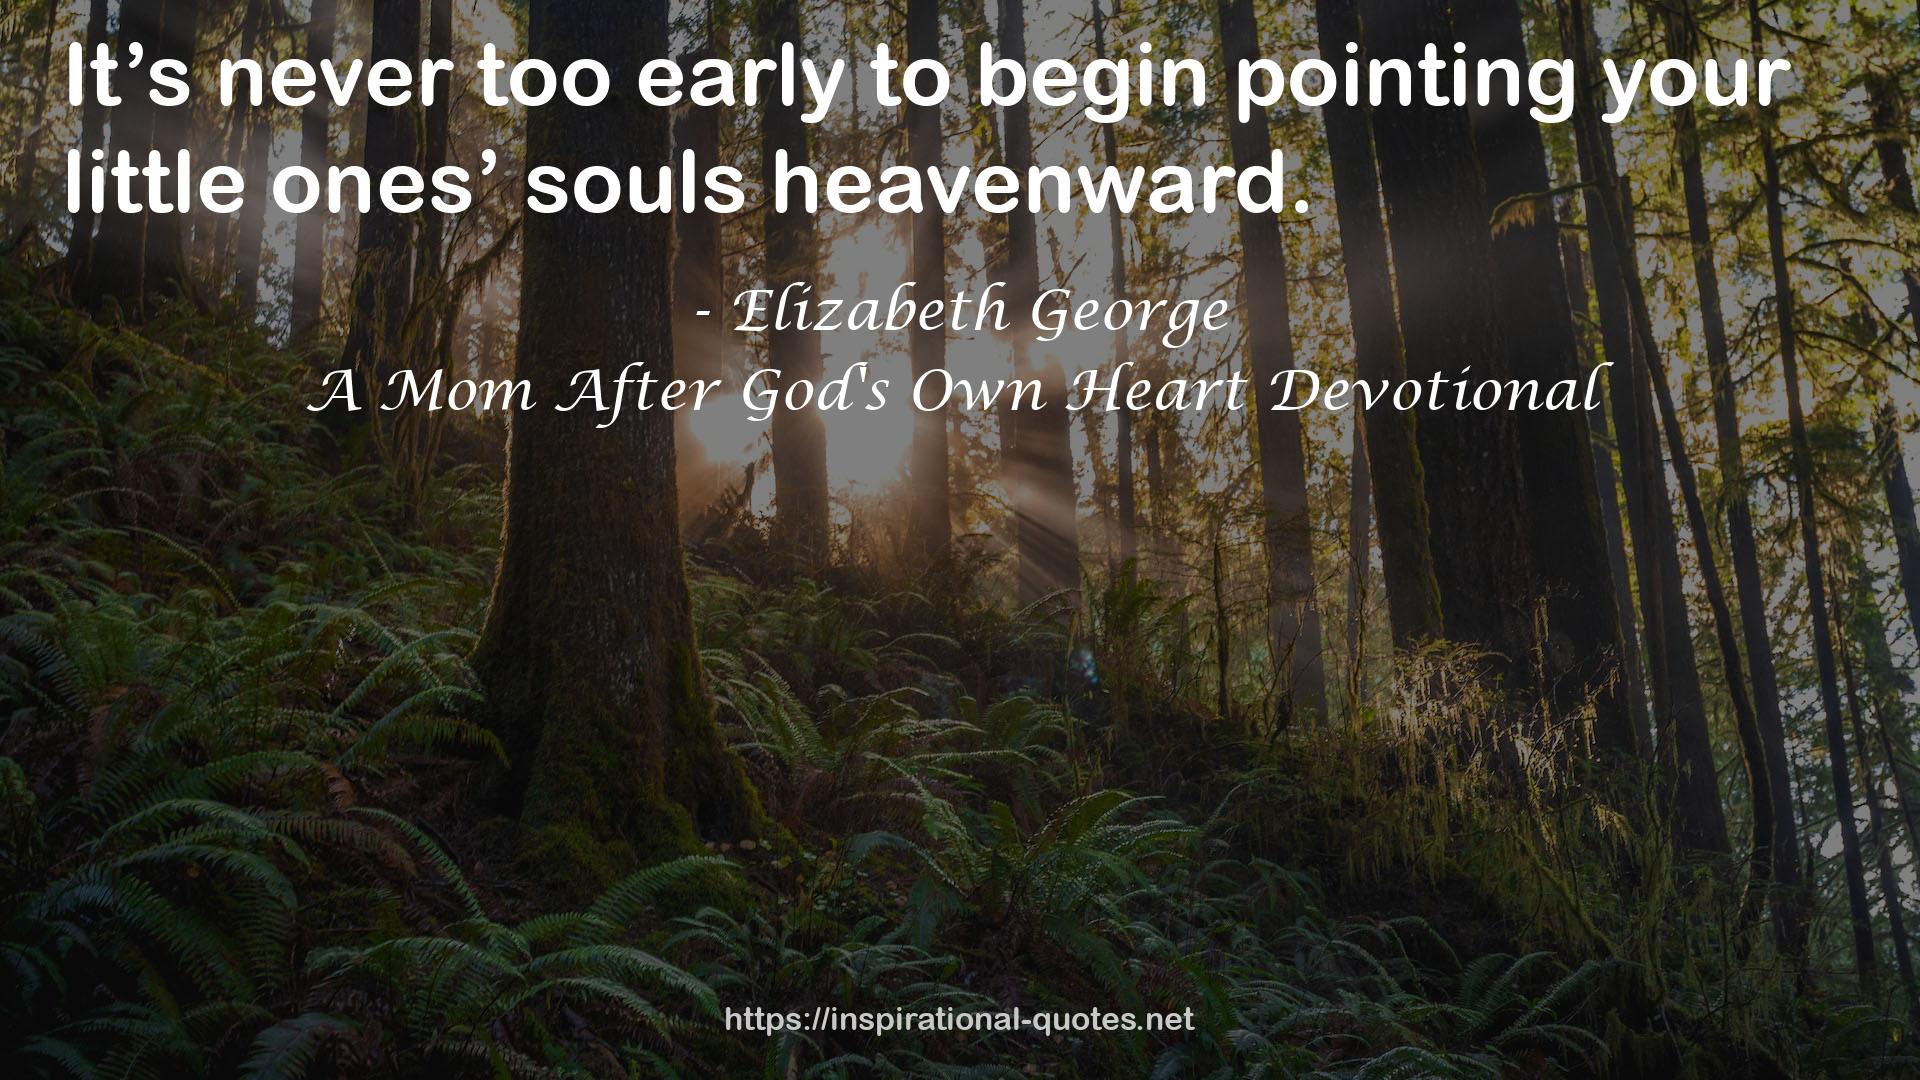 A Mom After God's Own Heart Devotional QUOTES